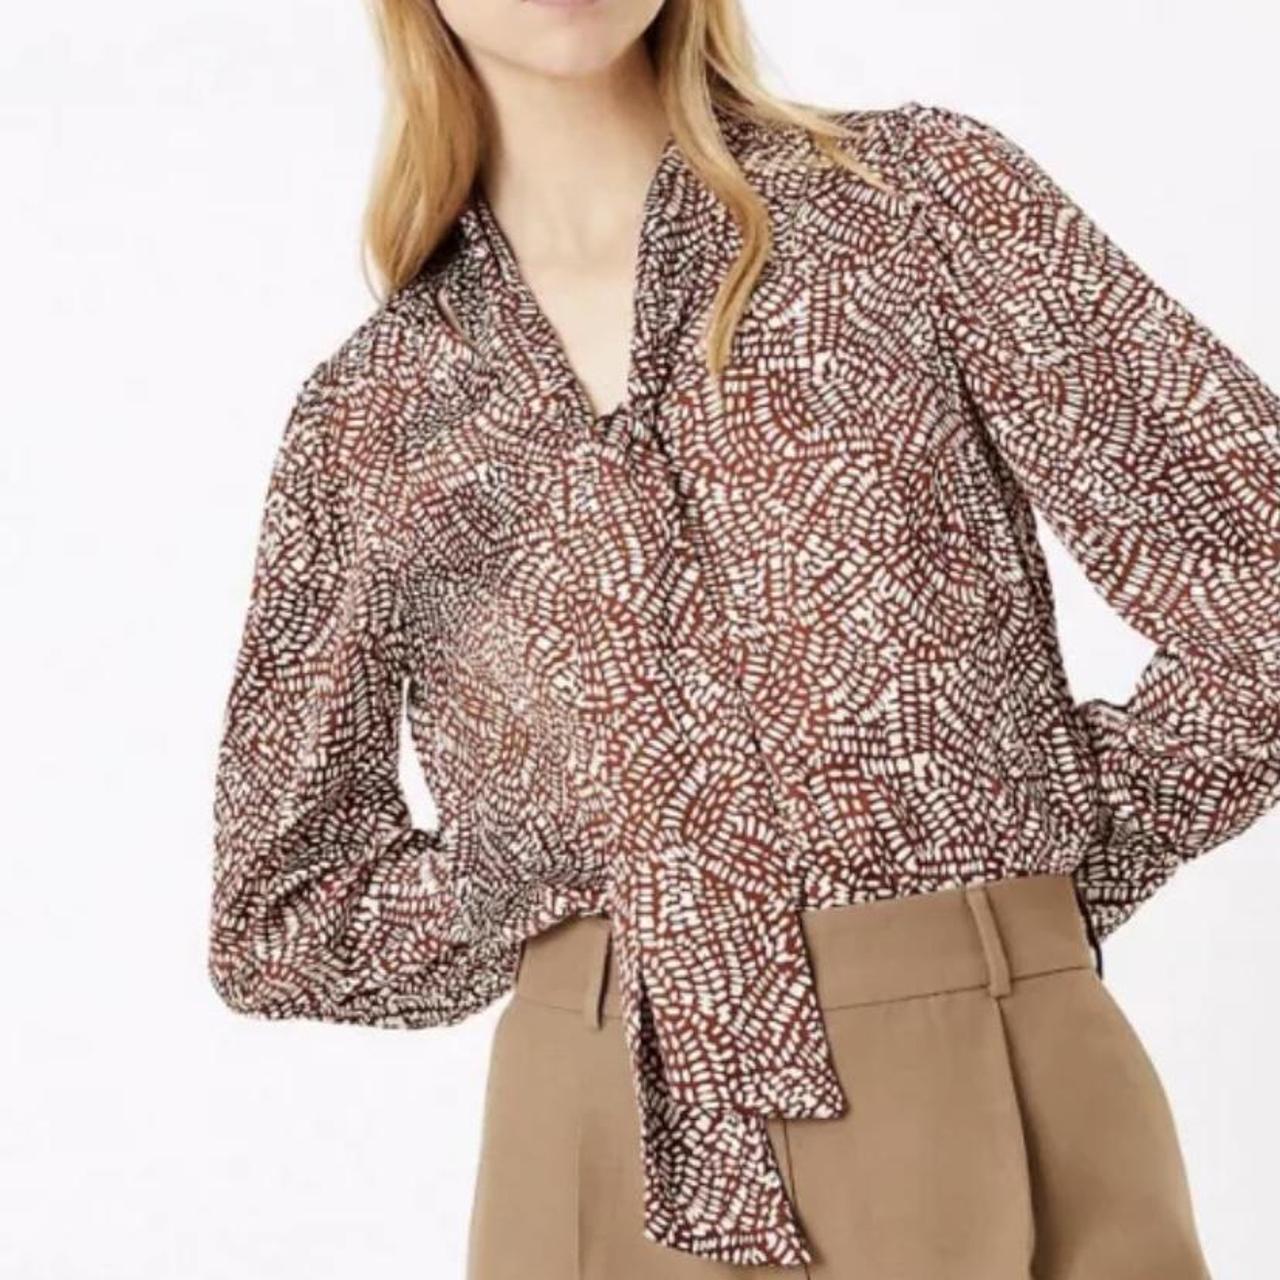 Marks & Spencer Women's Brown and White Blouse